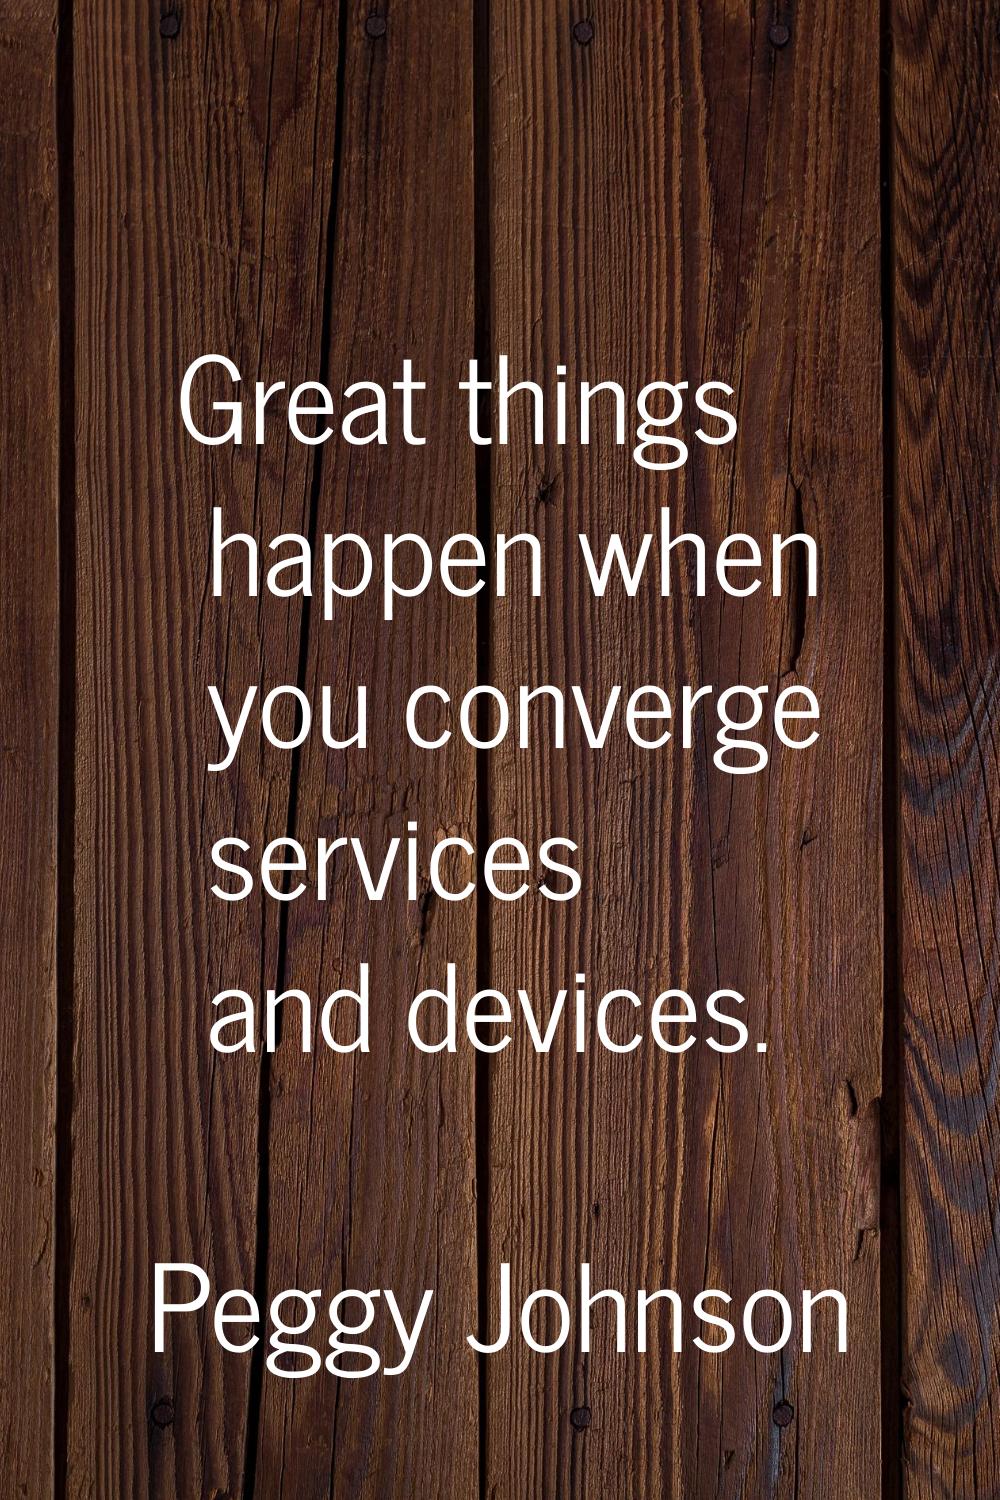 Great things happen when you converge services and devices.